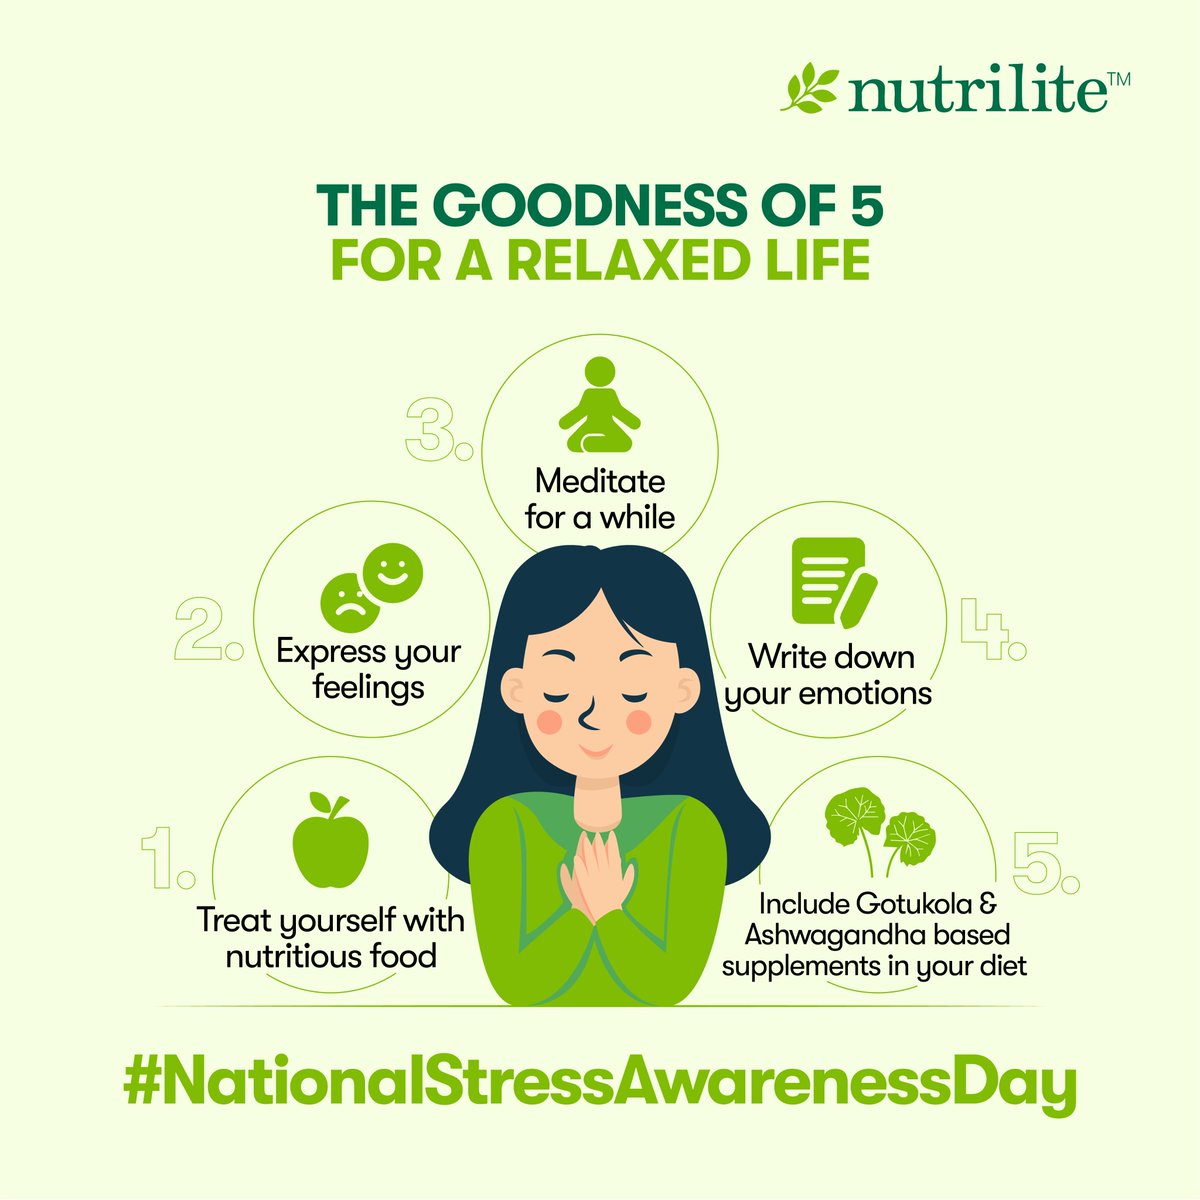 On this National Stress Awareness Day, let’s add the goodness of 5 self-care tips in our daily schedule and prioritize our mental health to lead a happier, healthier life.
#Nutrilite #HealthyLiving #StressAwarenessDay